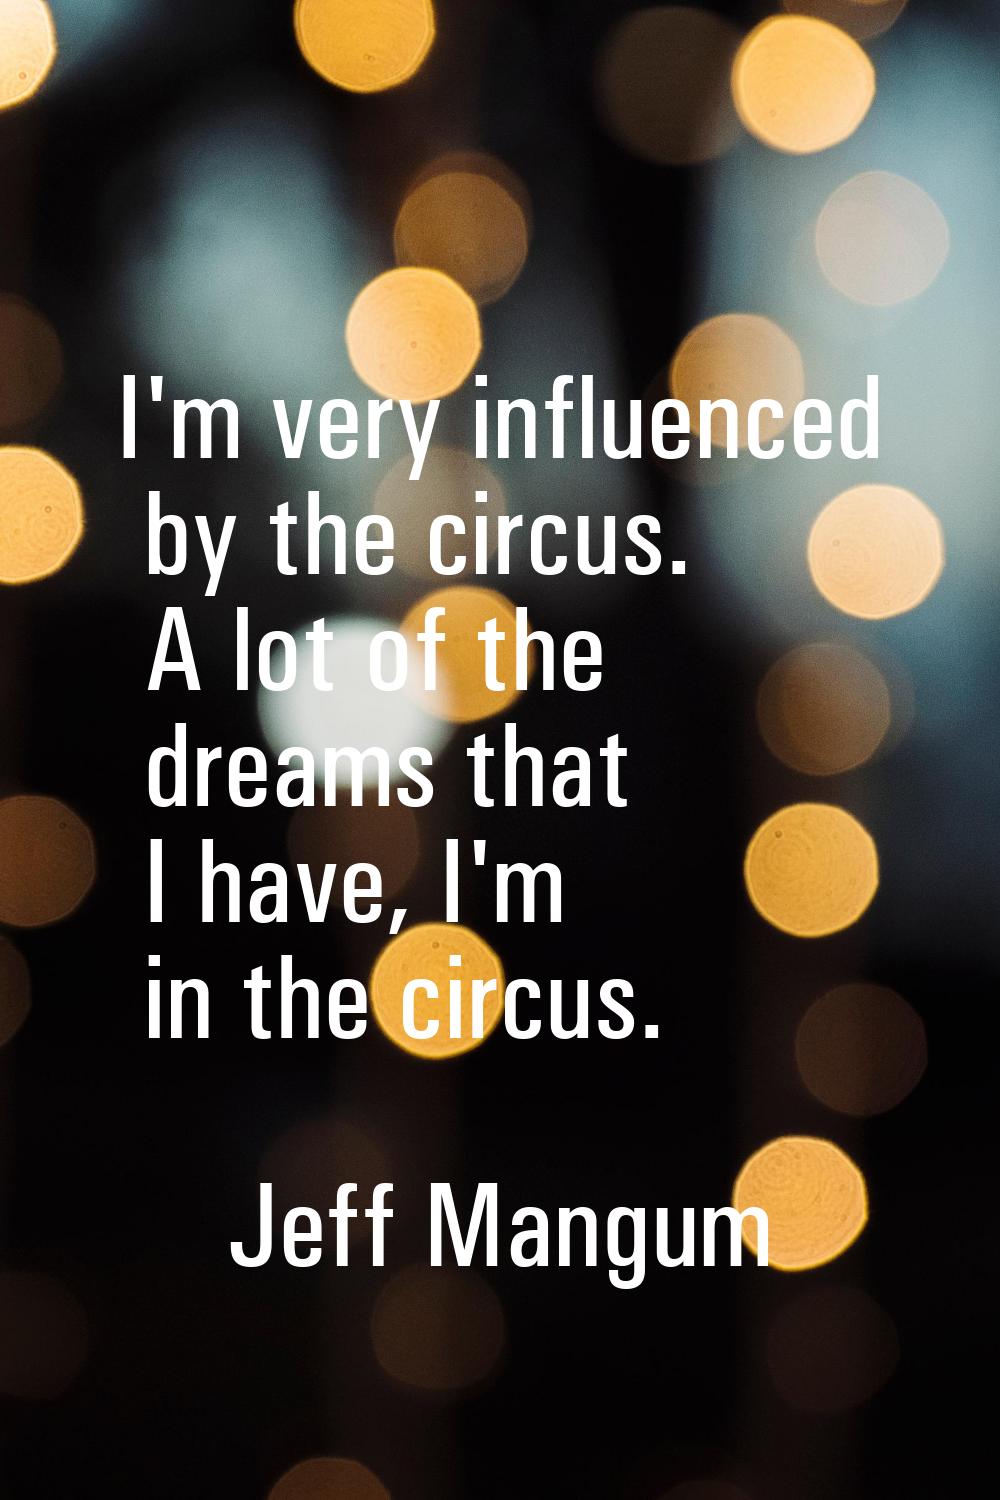 I'm very influenced by the circus. A lot of the dreams that I have, I'm in the circus.